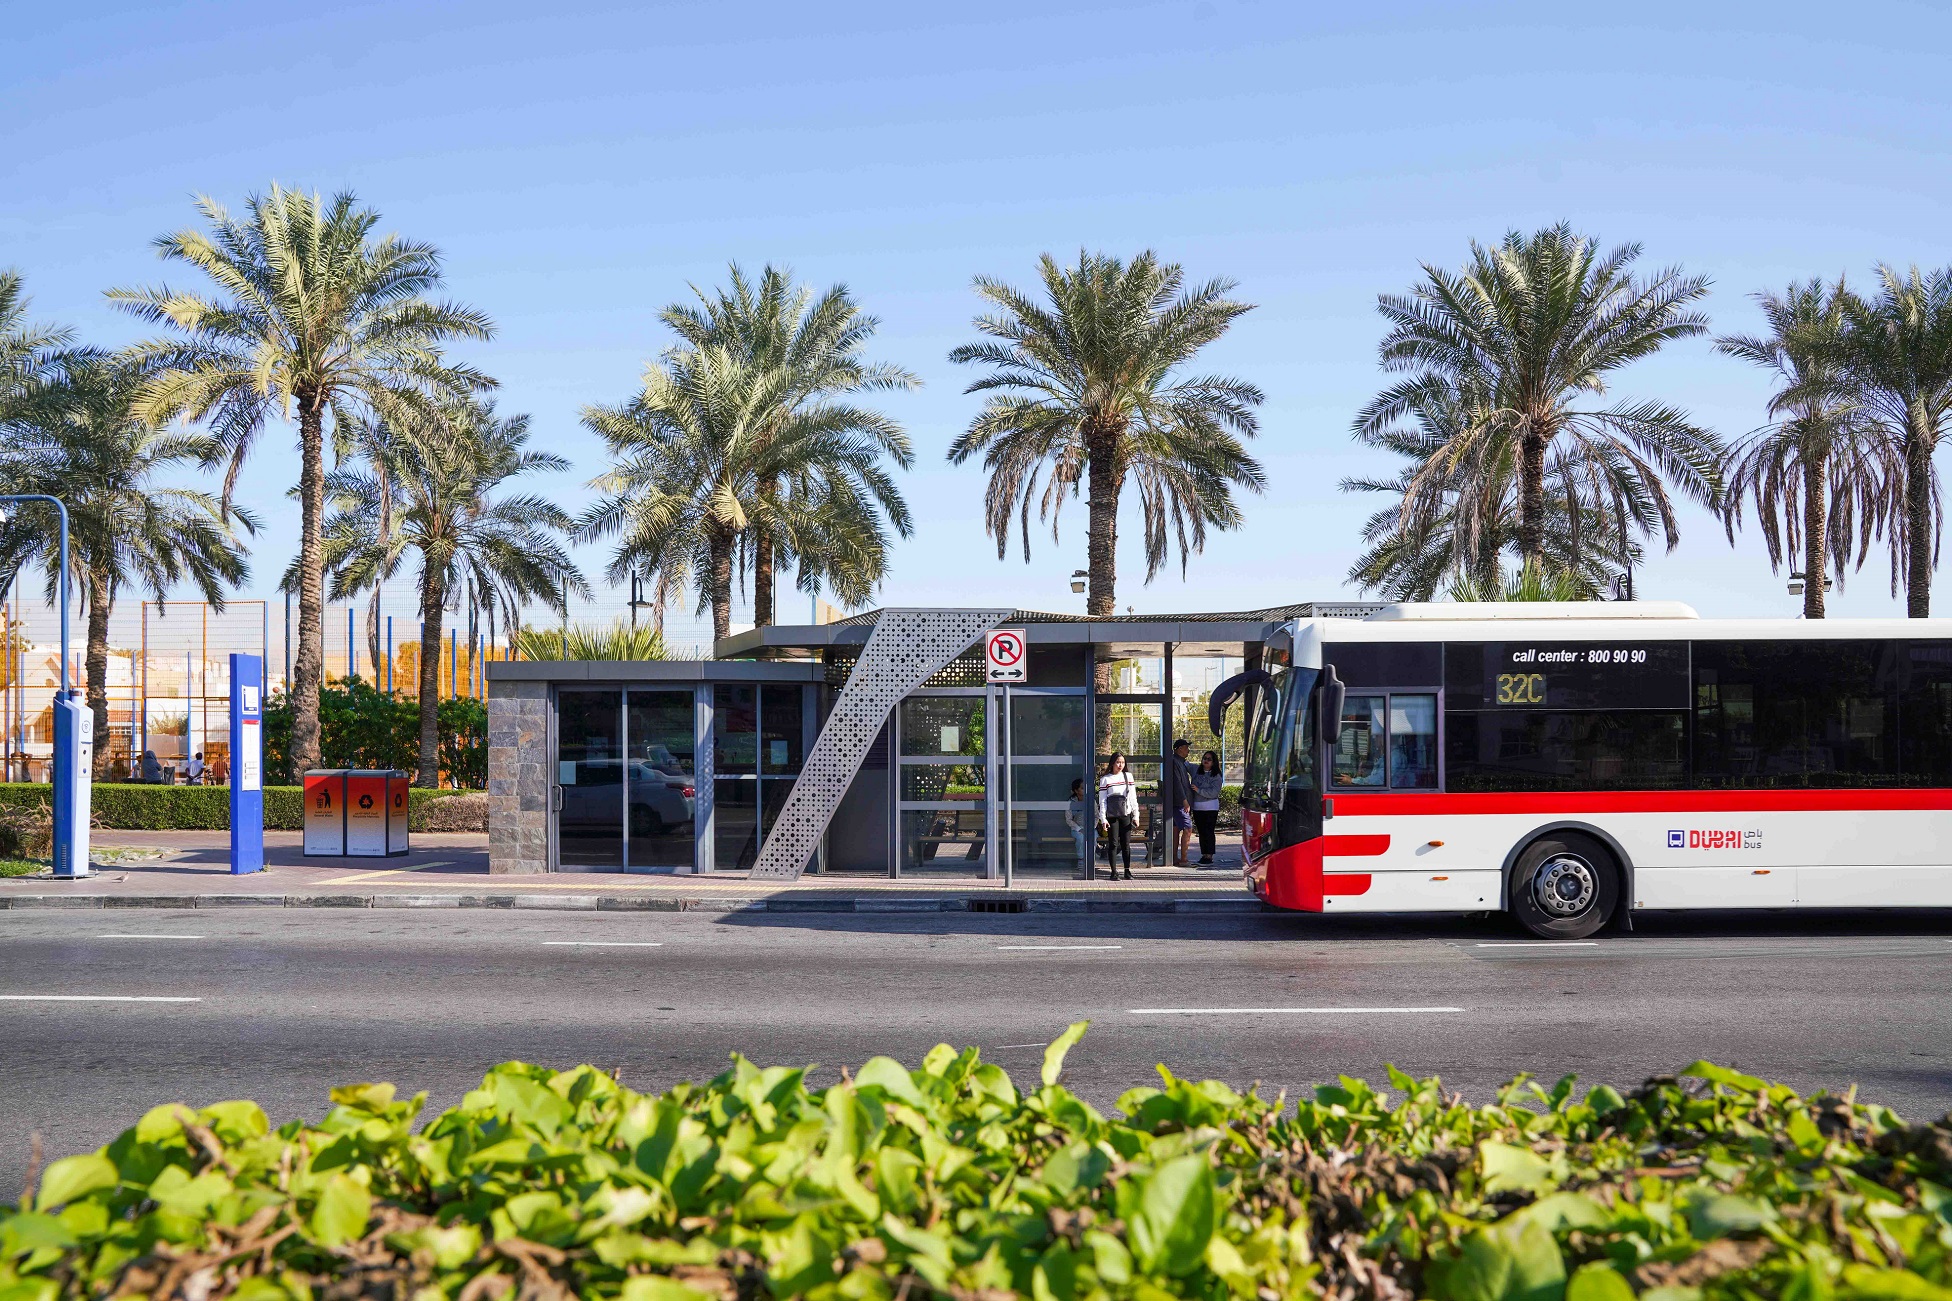 Dubai tries out first-ever hydrogen bus